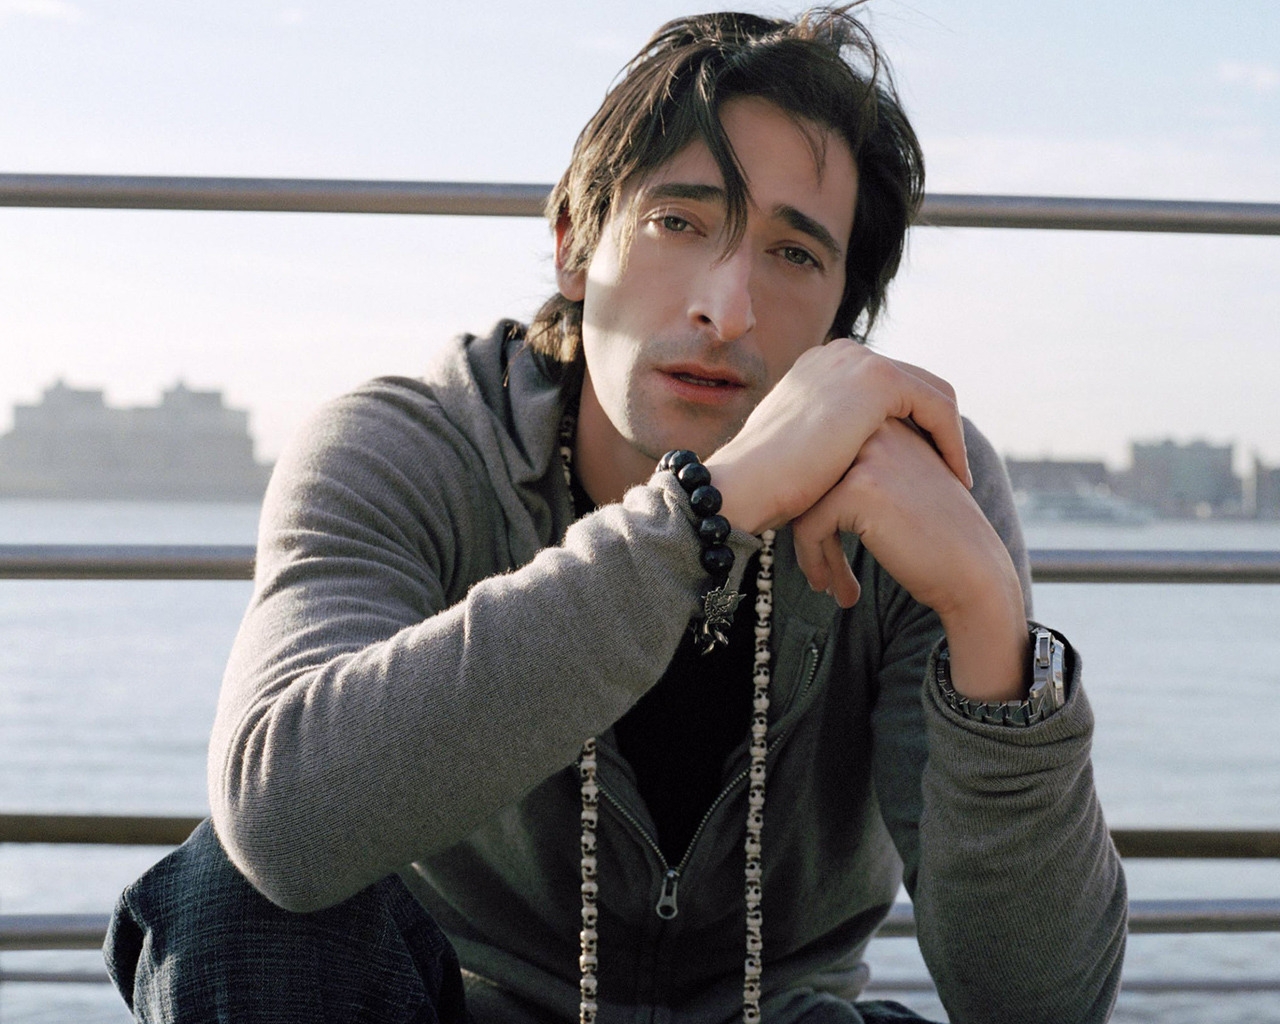 Adrien Brody for 1280 x 1024 resolution